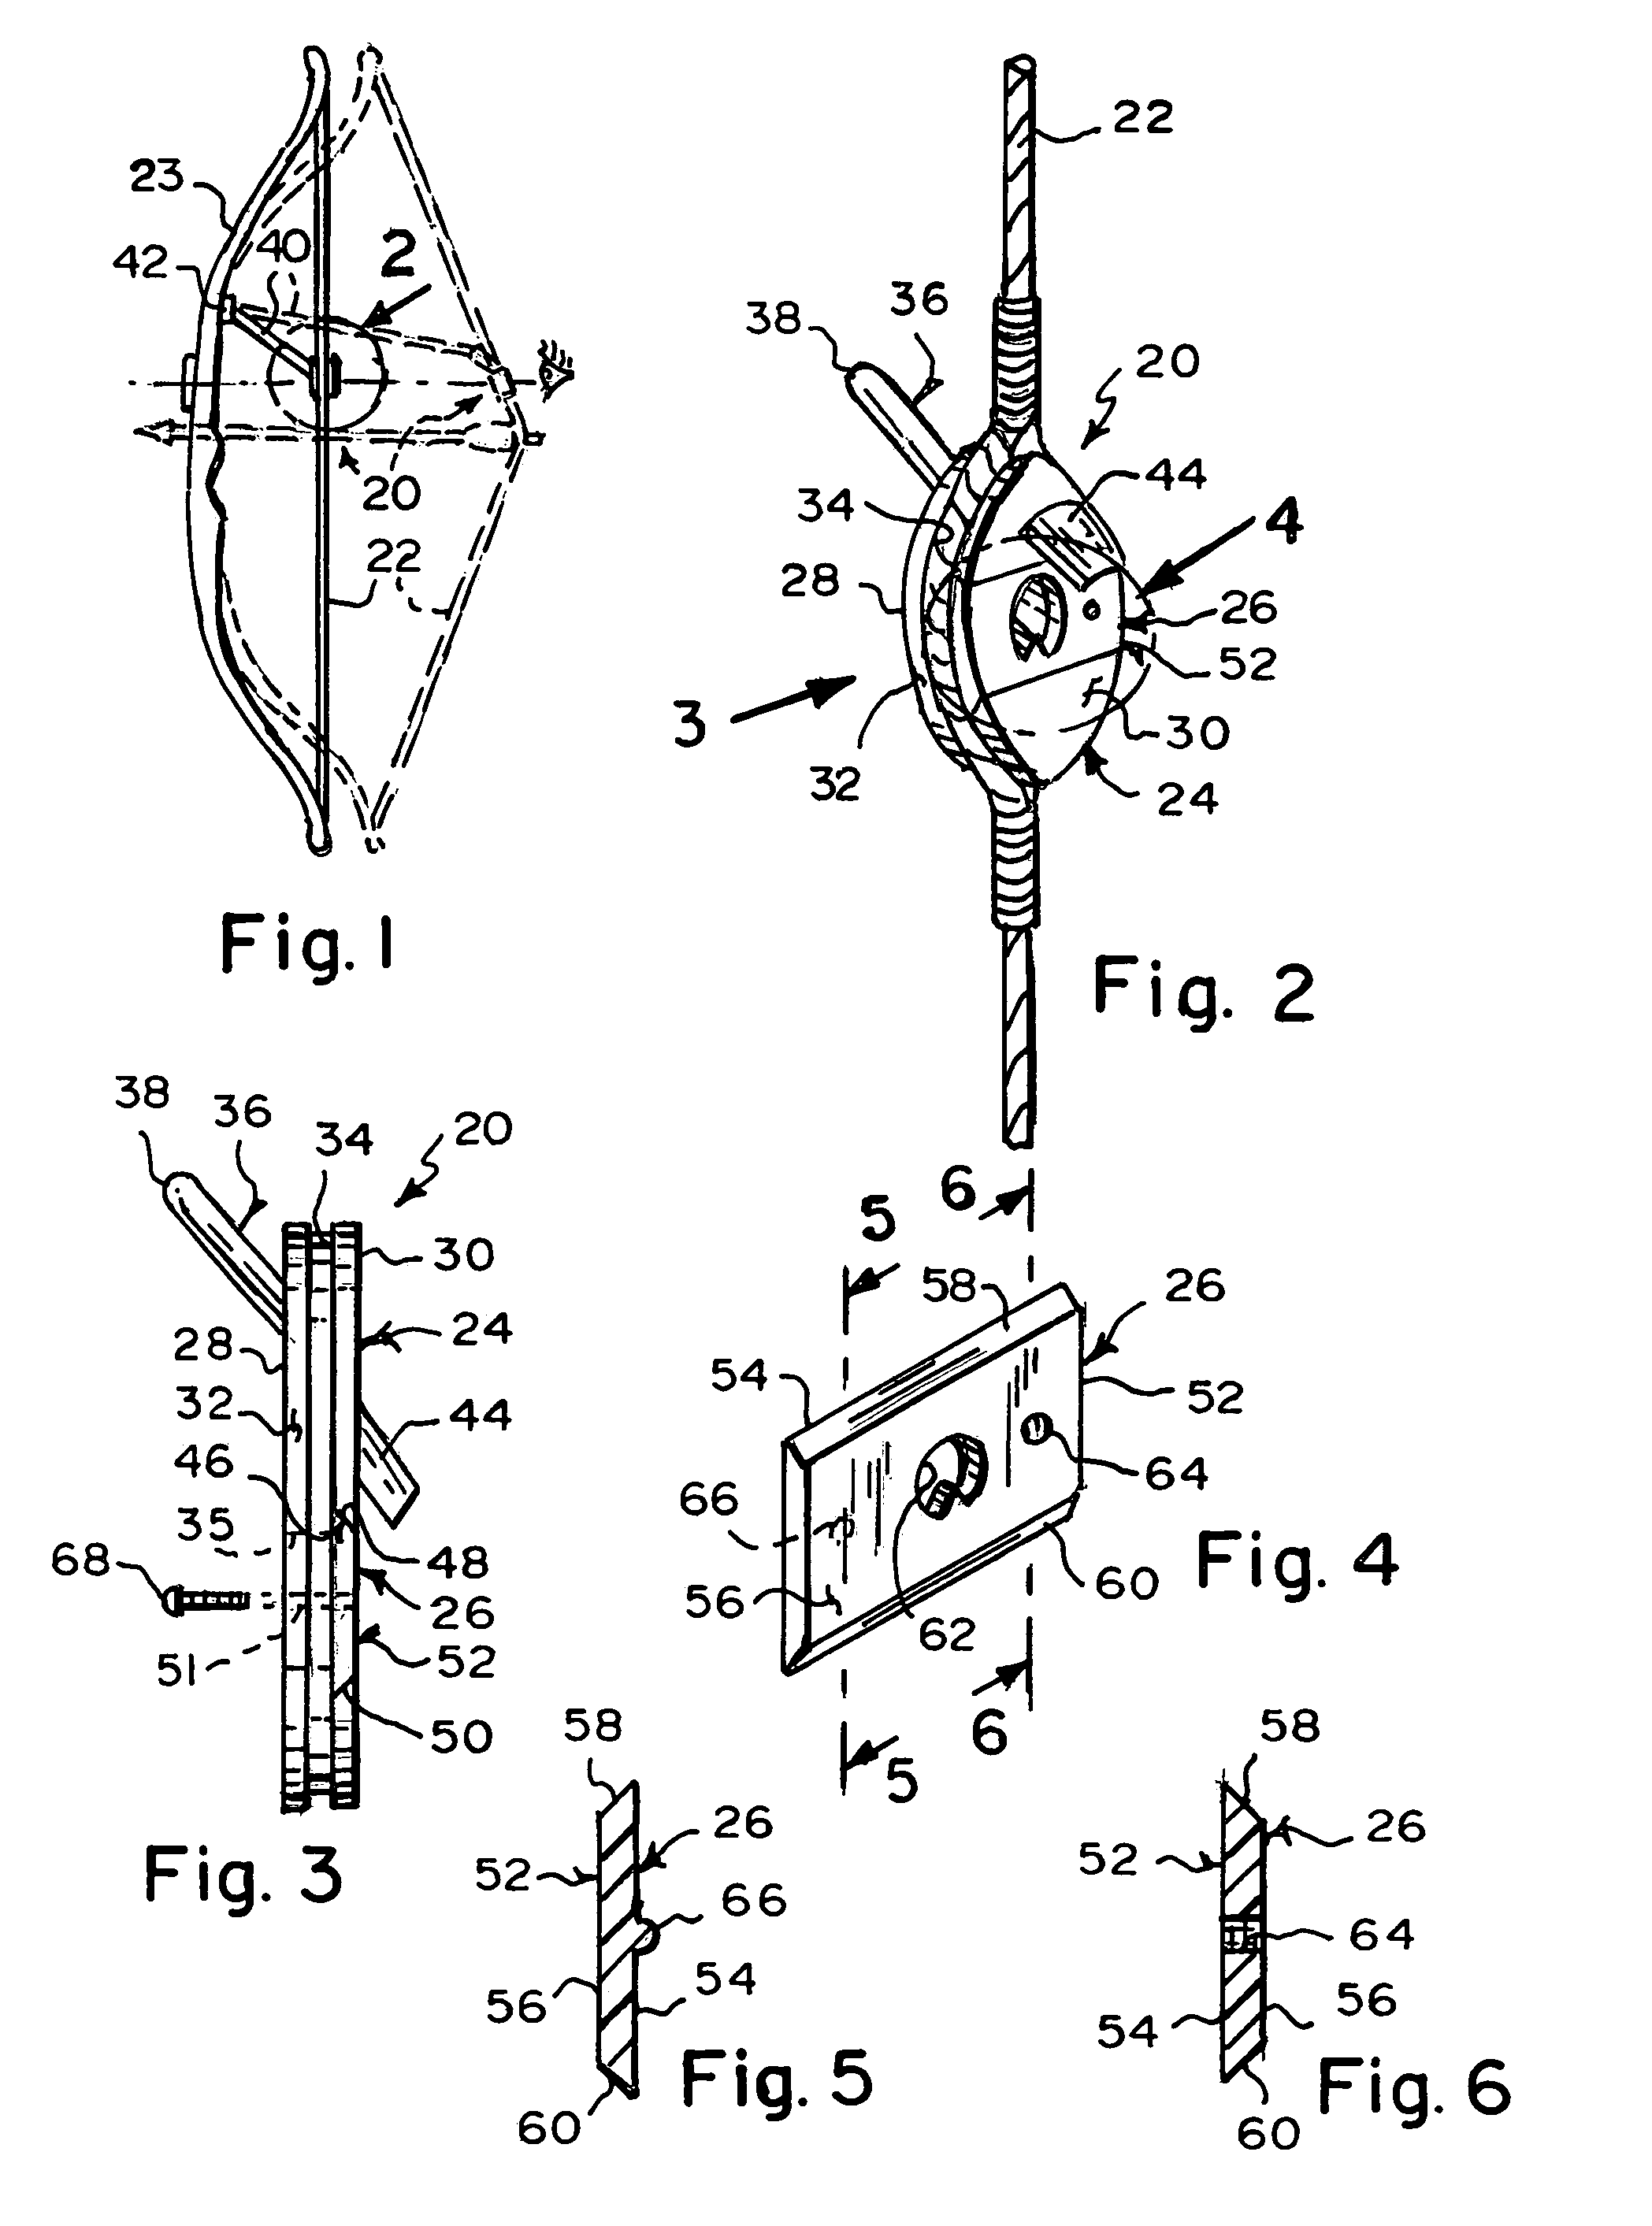 Rear peep sight for mounting to a bow string, having interchangeable sight ports for accommodating user preferences